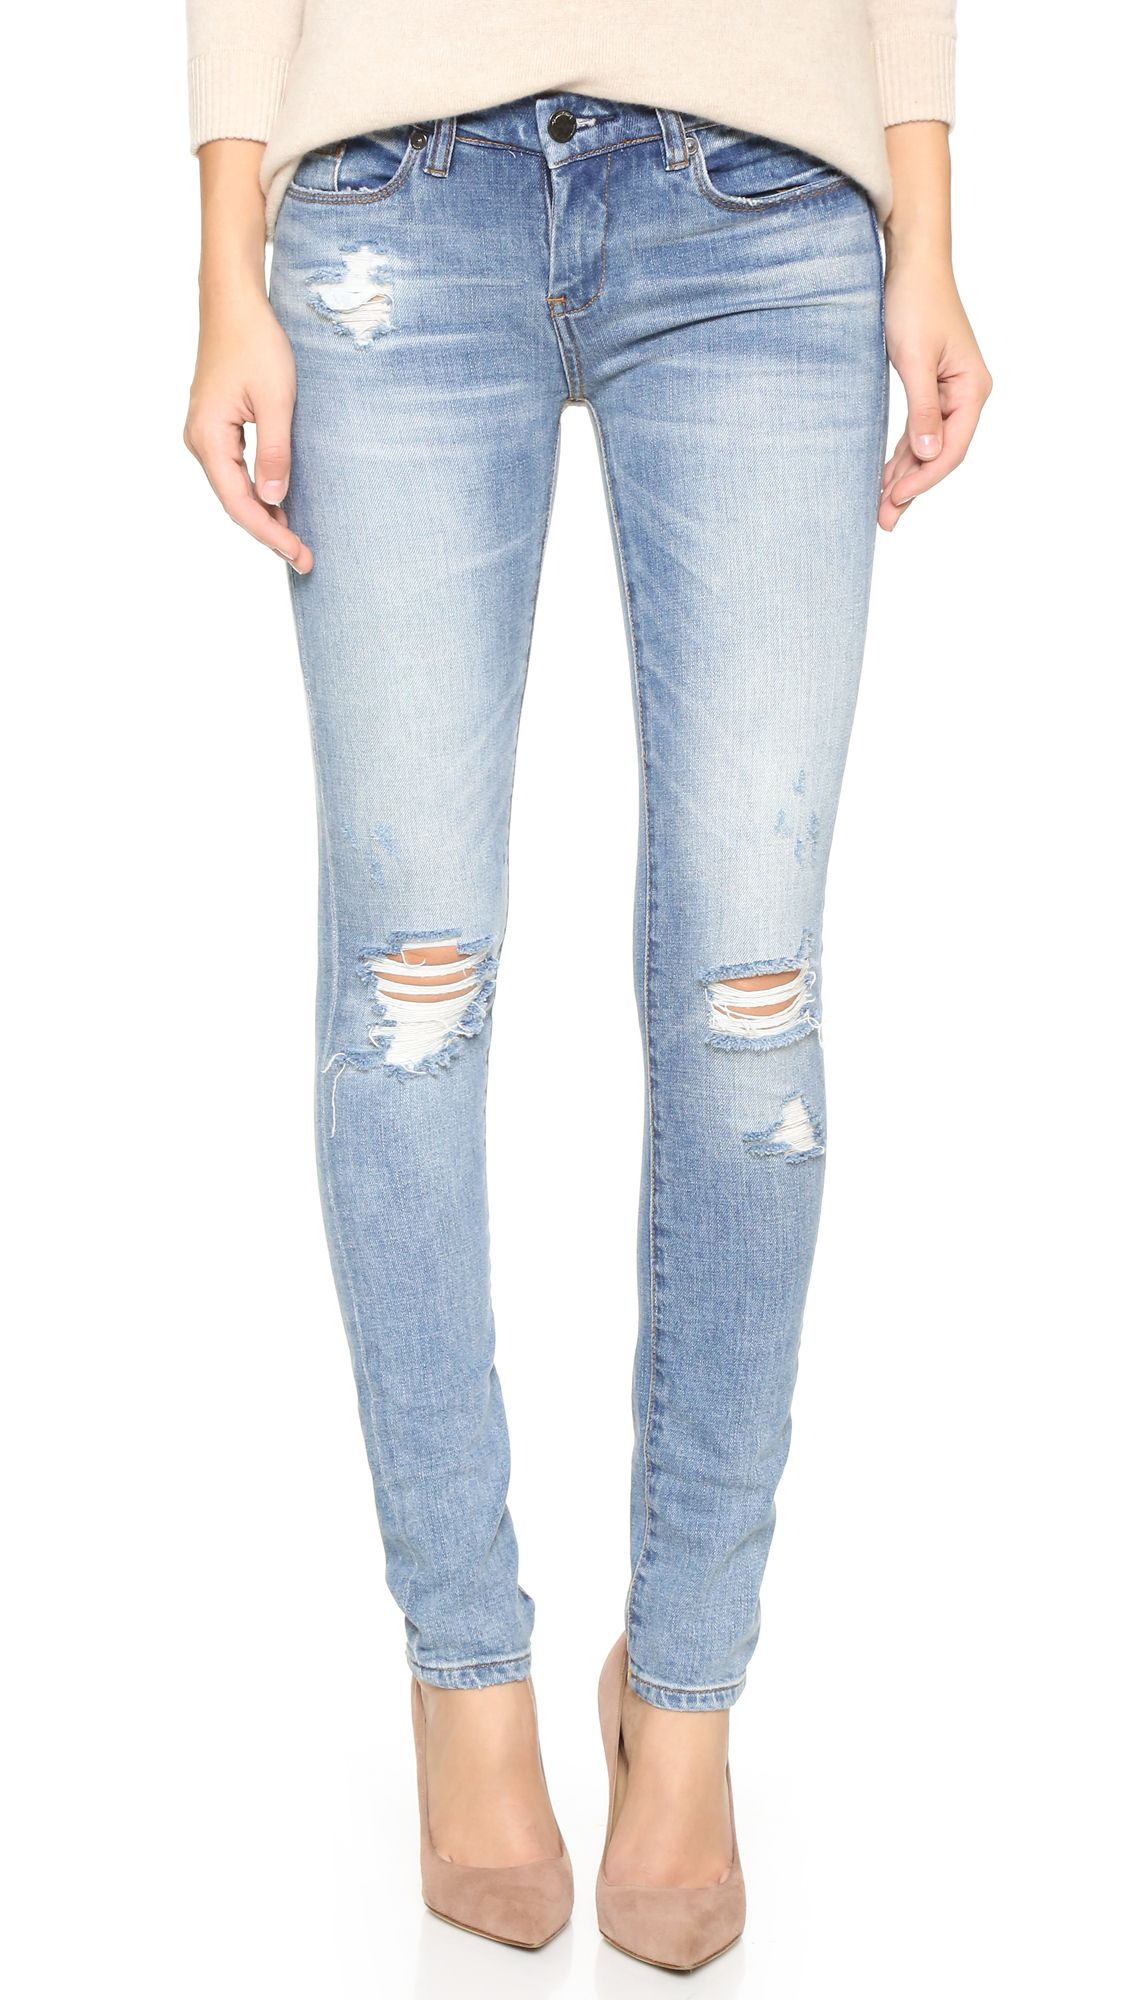 Ripped Skinny Jeans | Shopbop